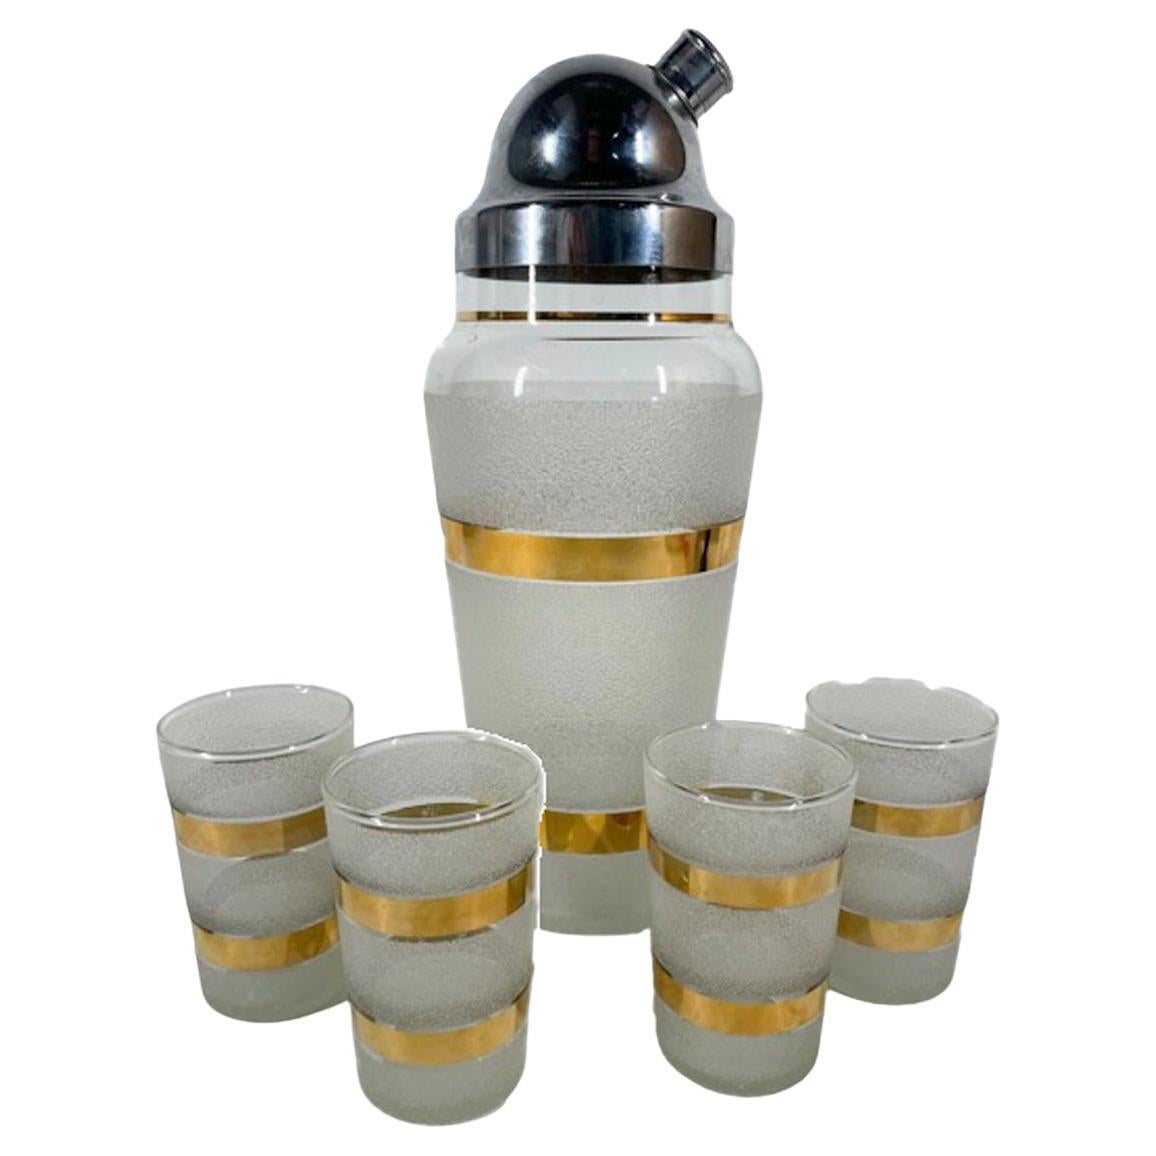 Vintage Cocktail Shaker Set with Gold Bands and Textured Frosted Surface For Sale